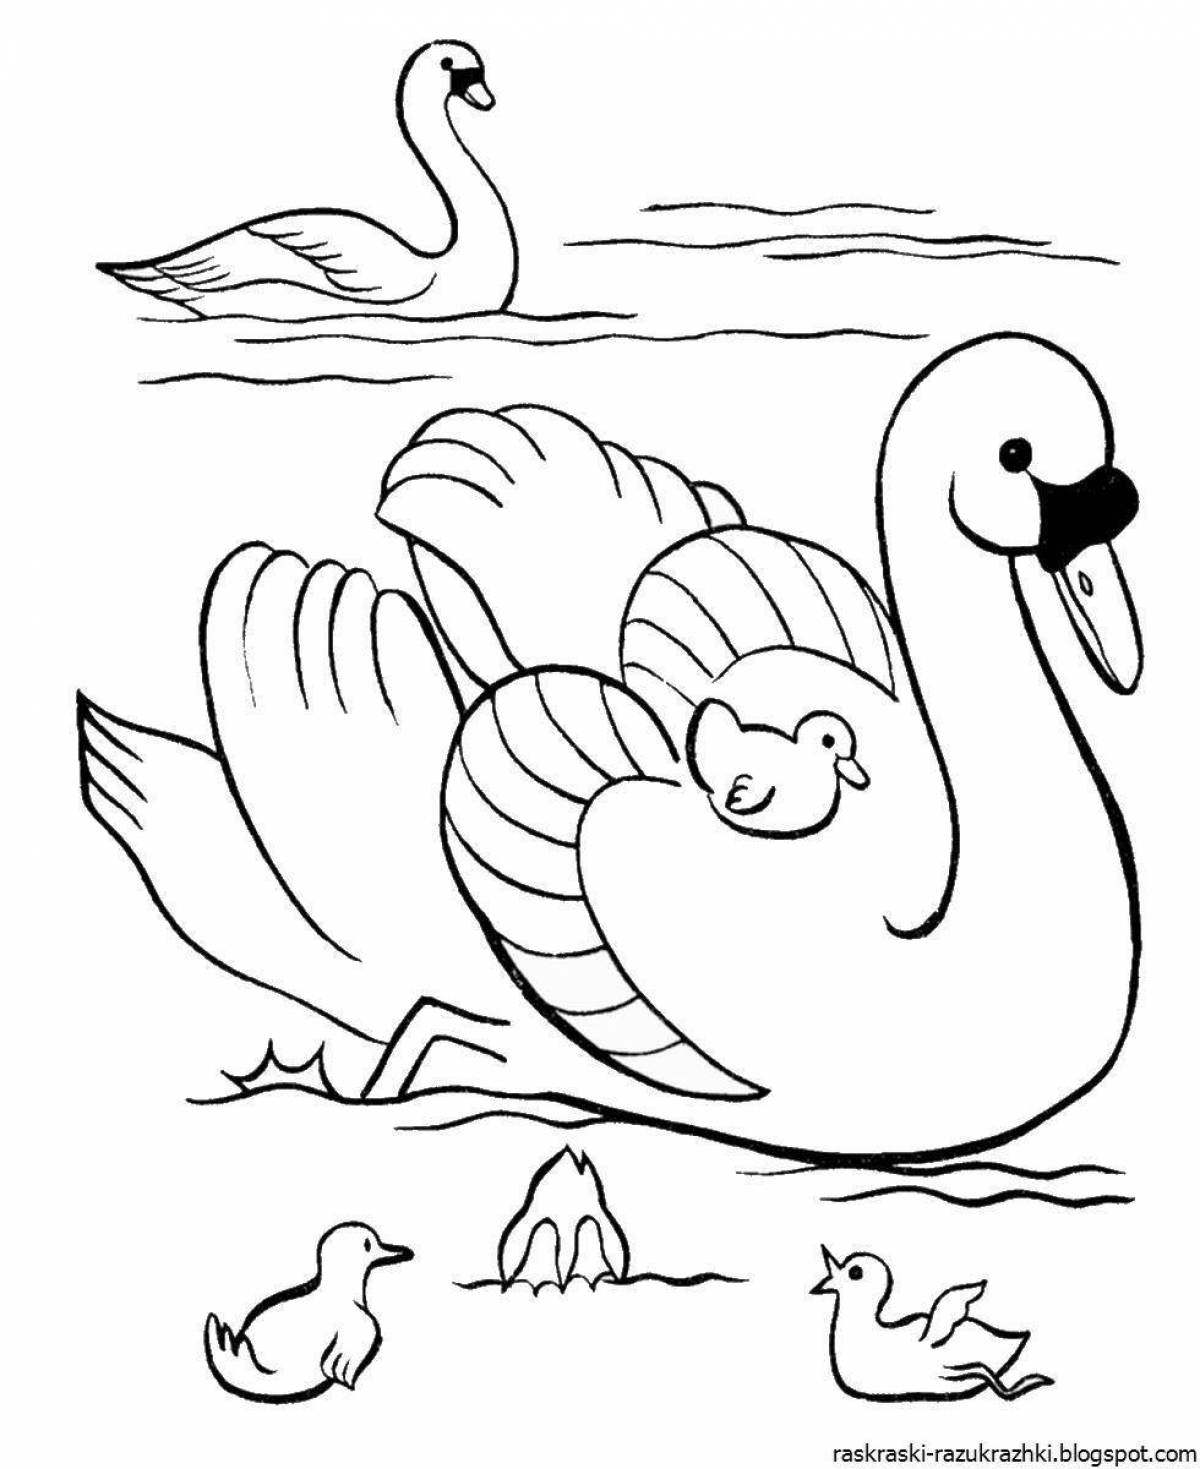 Charming swan coloring book for kids